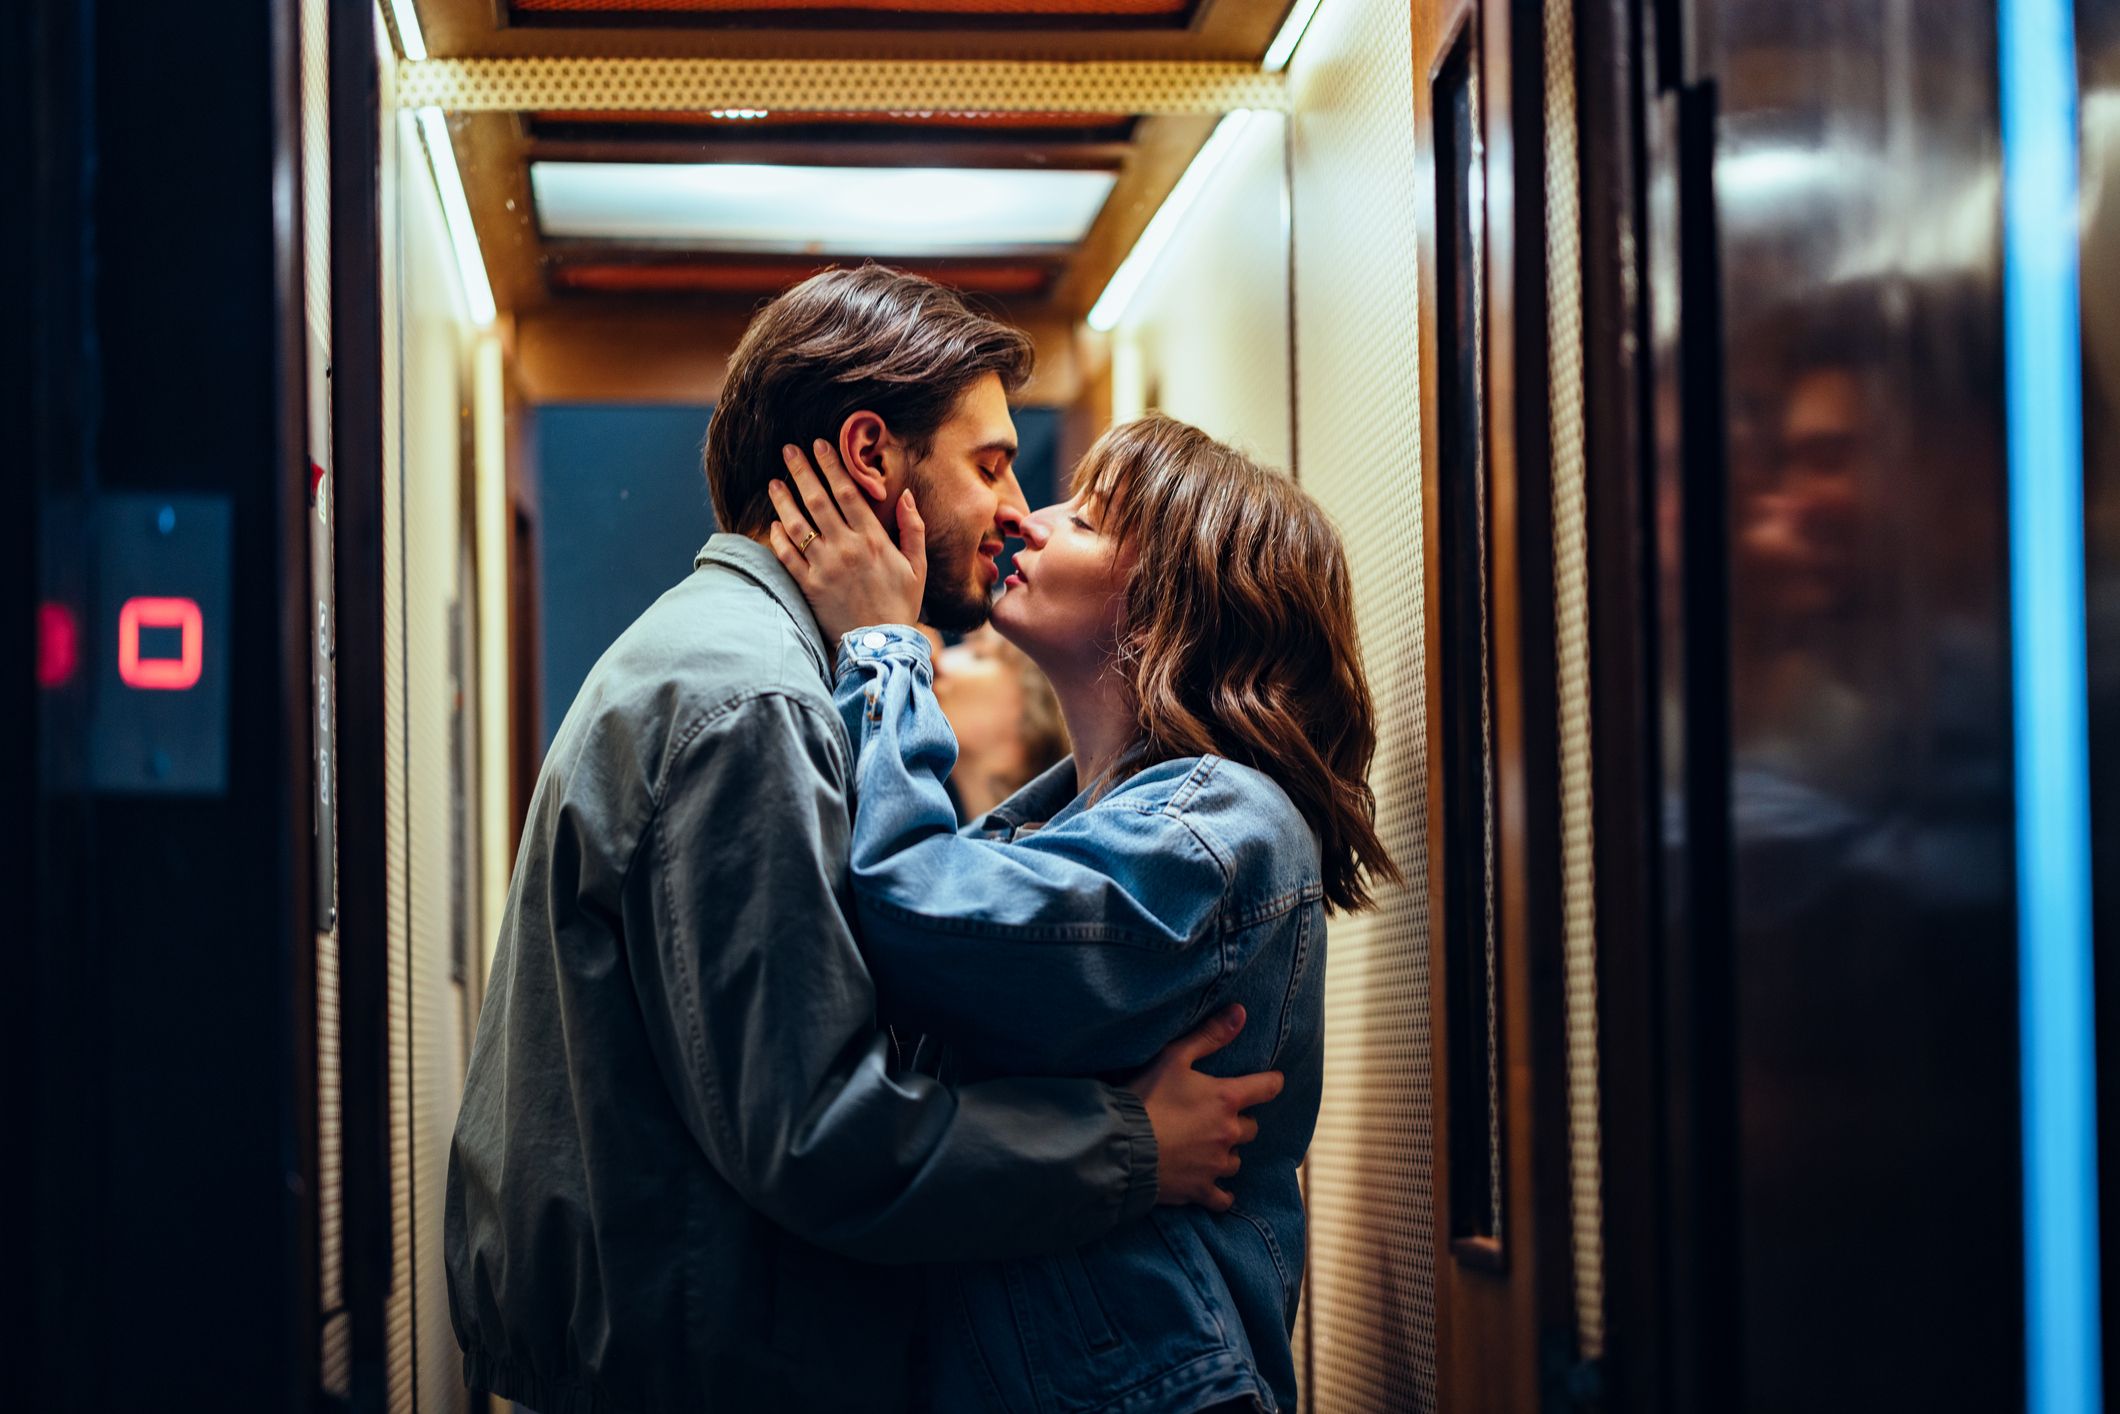 https://hips.hearstapps.com/hmg-prod/images/happy-couple-kissing-in-the-elevator-royalty-free-image-1702432374.jpg